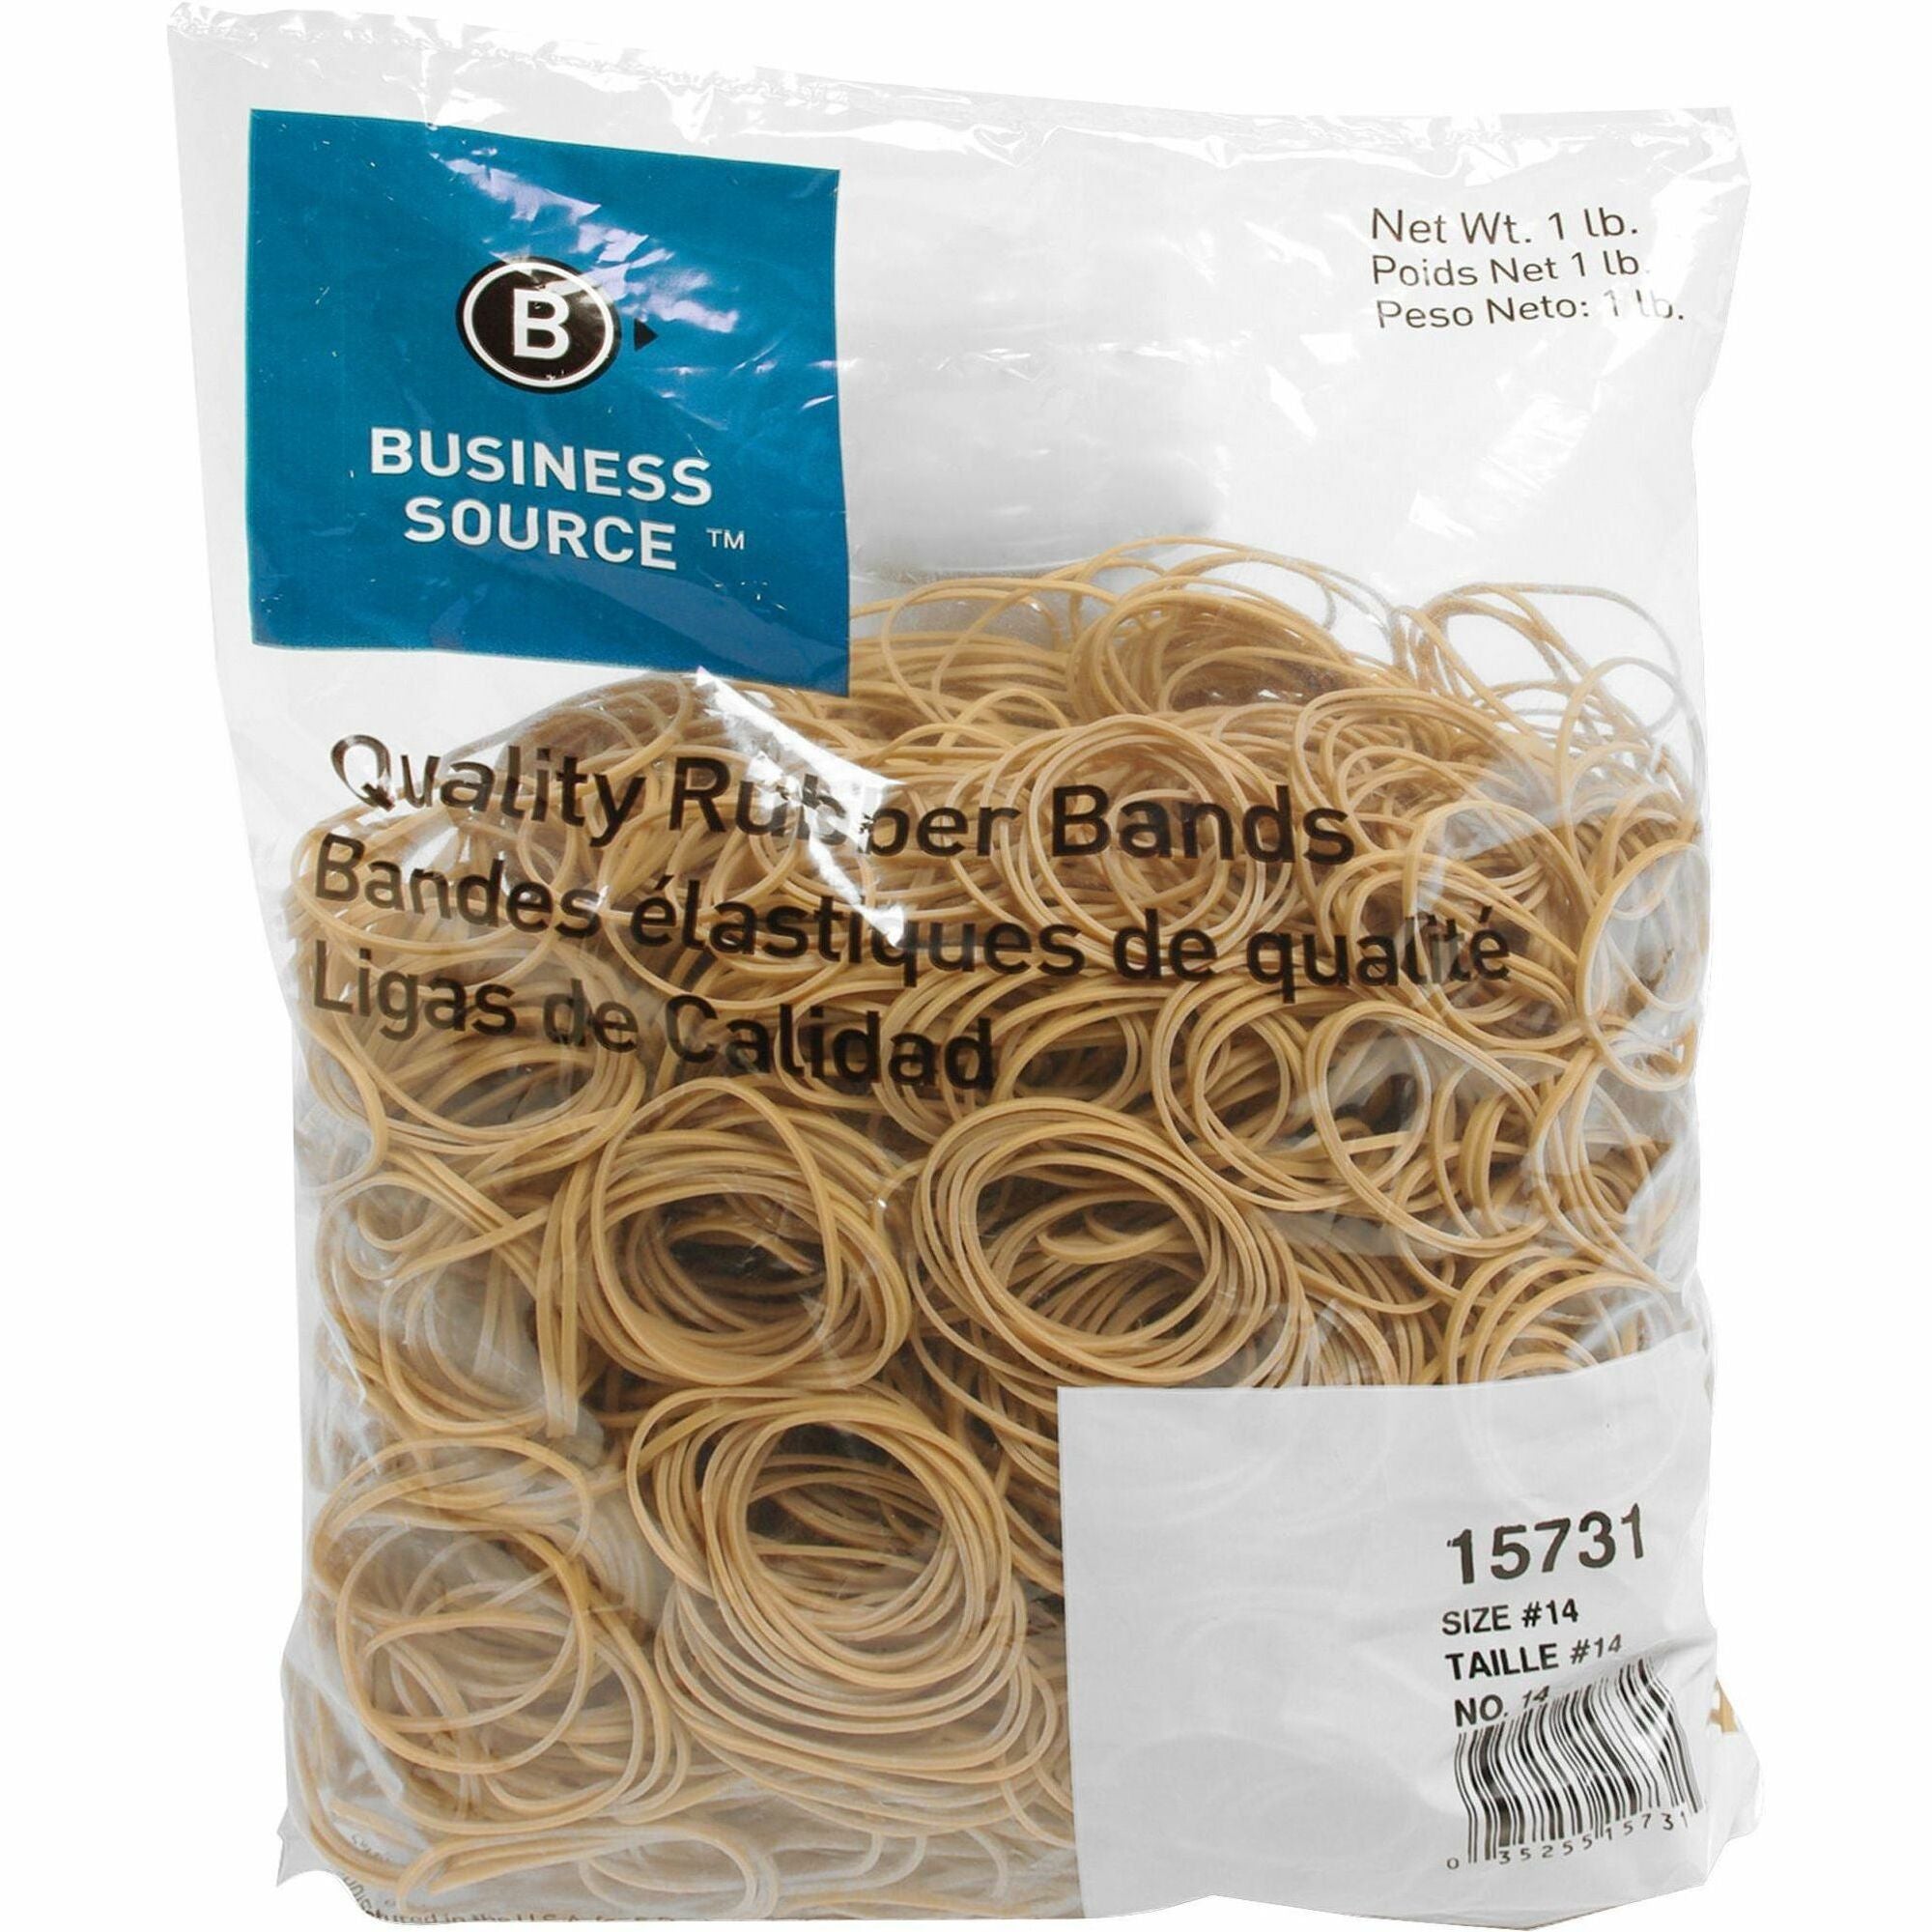 Business Source Quality Rubber Bands - Size: #14 - 2" Length x 0.1" Width - Sustainable - 2250 / Pack - Rubber - Crepe - 